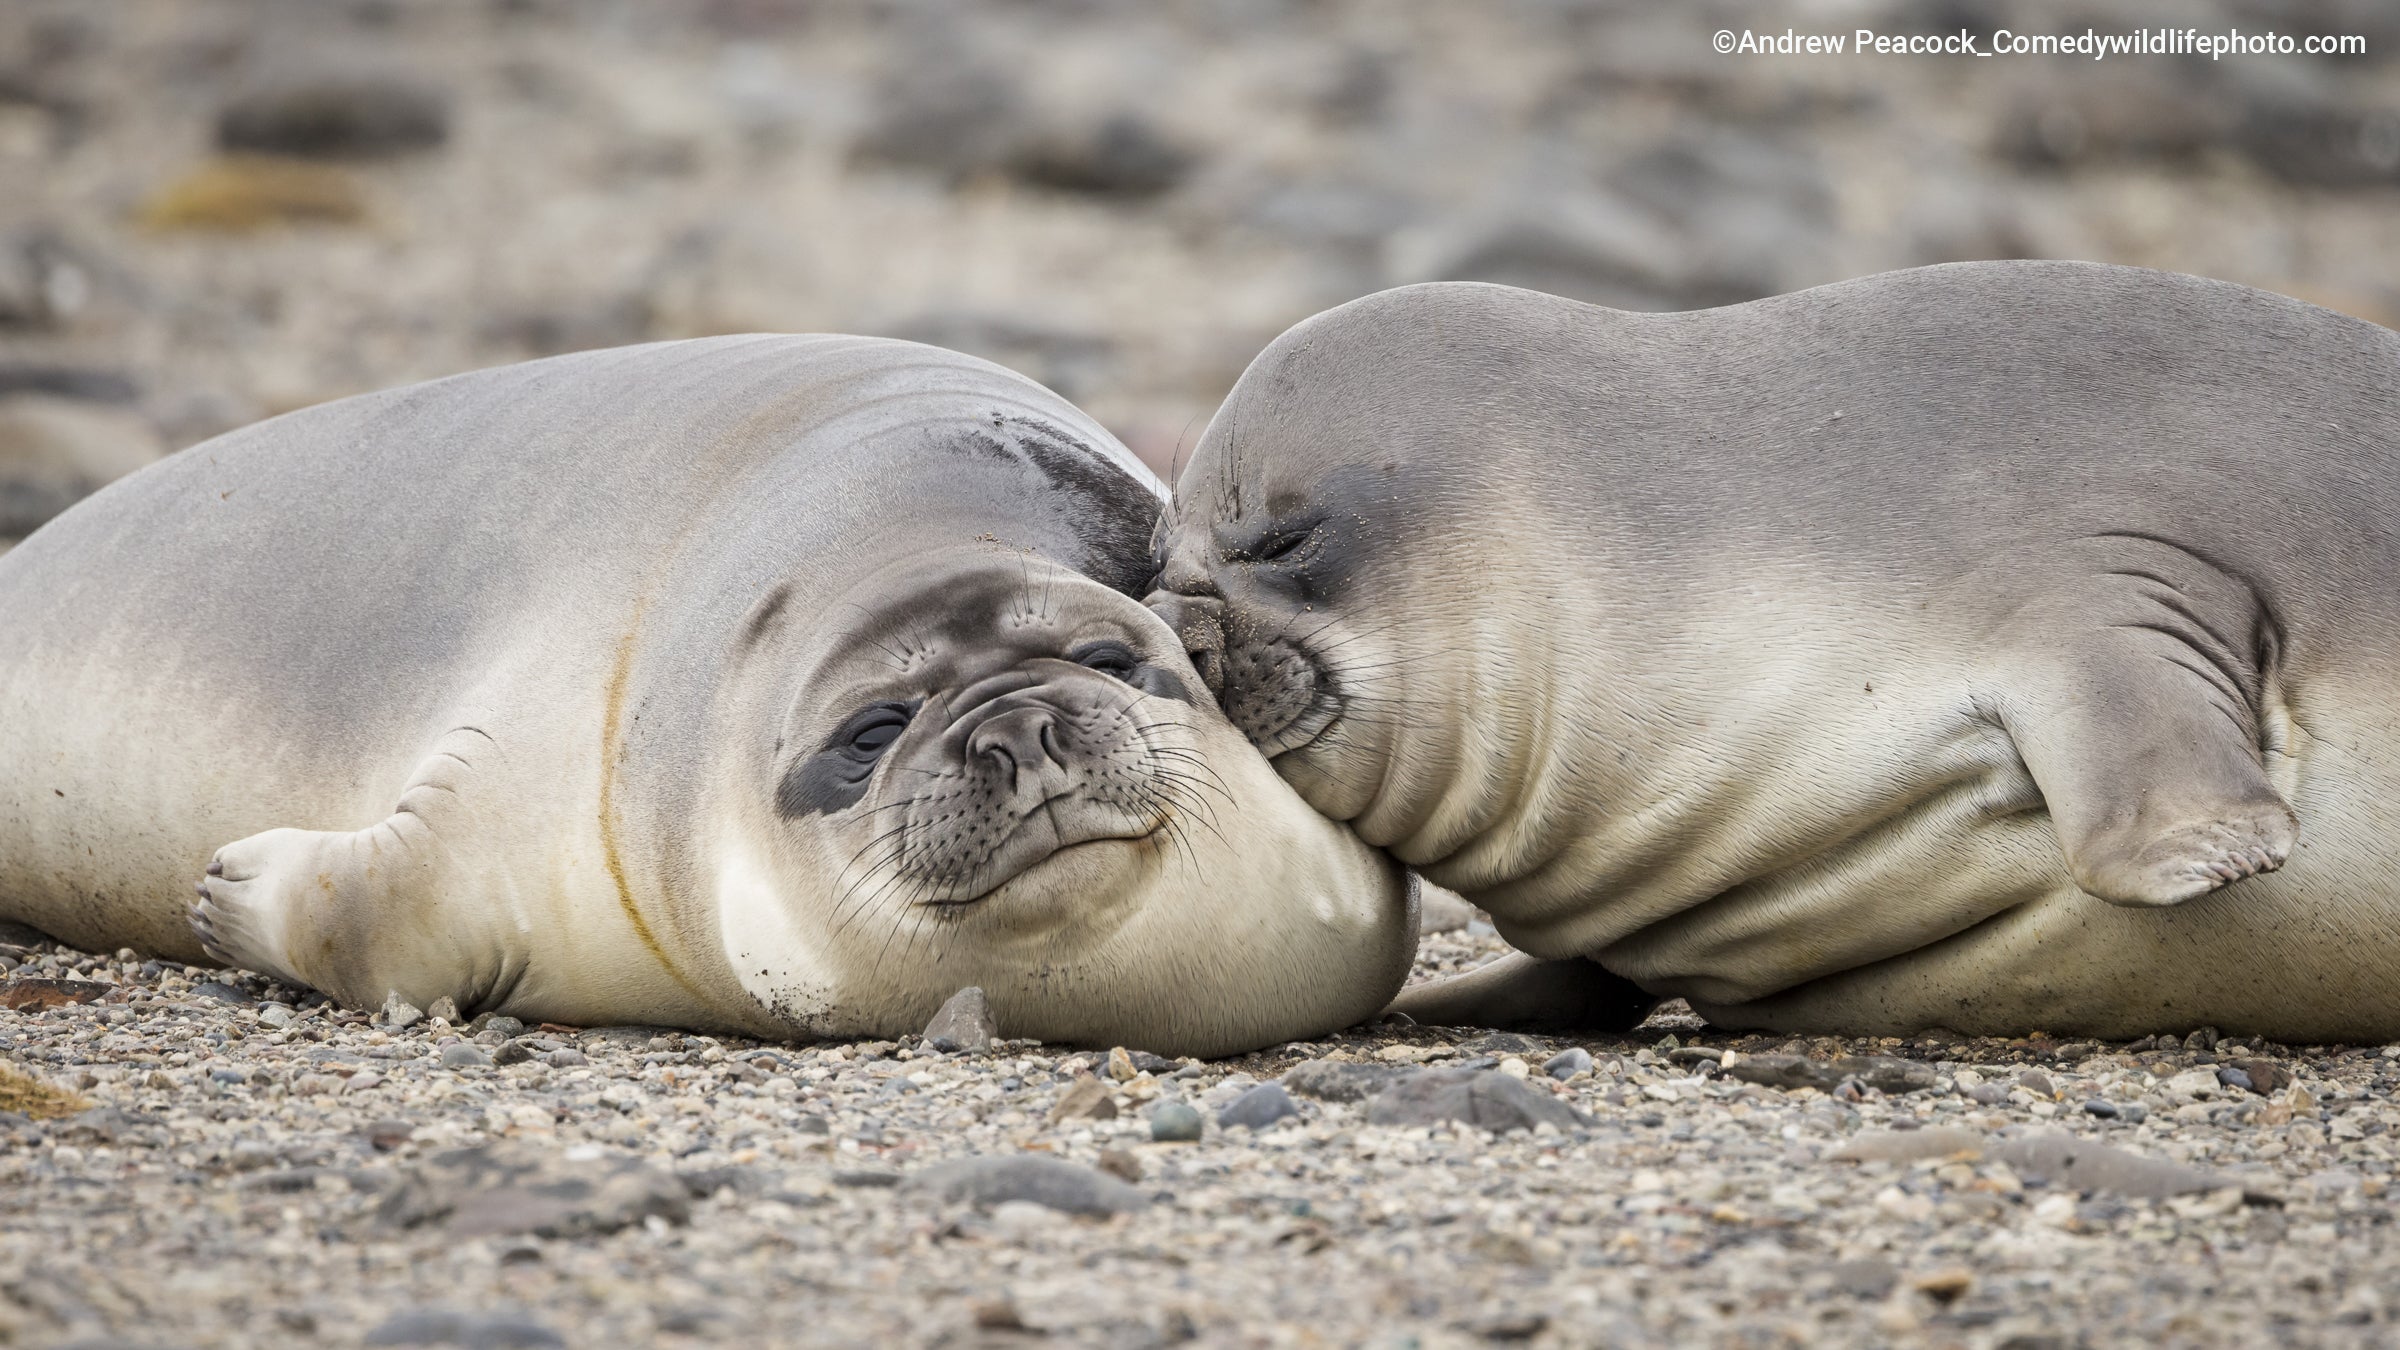 One Southern elephant seal boops another. (Photo: © Andrew Peacock / Comedywildlifephoto.com.)